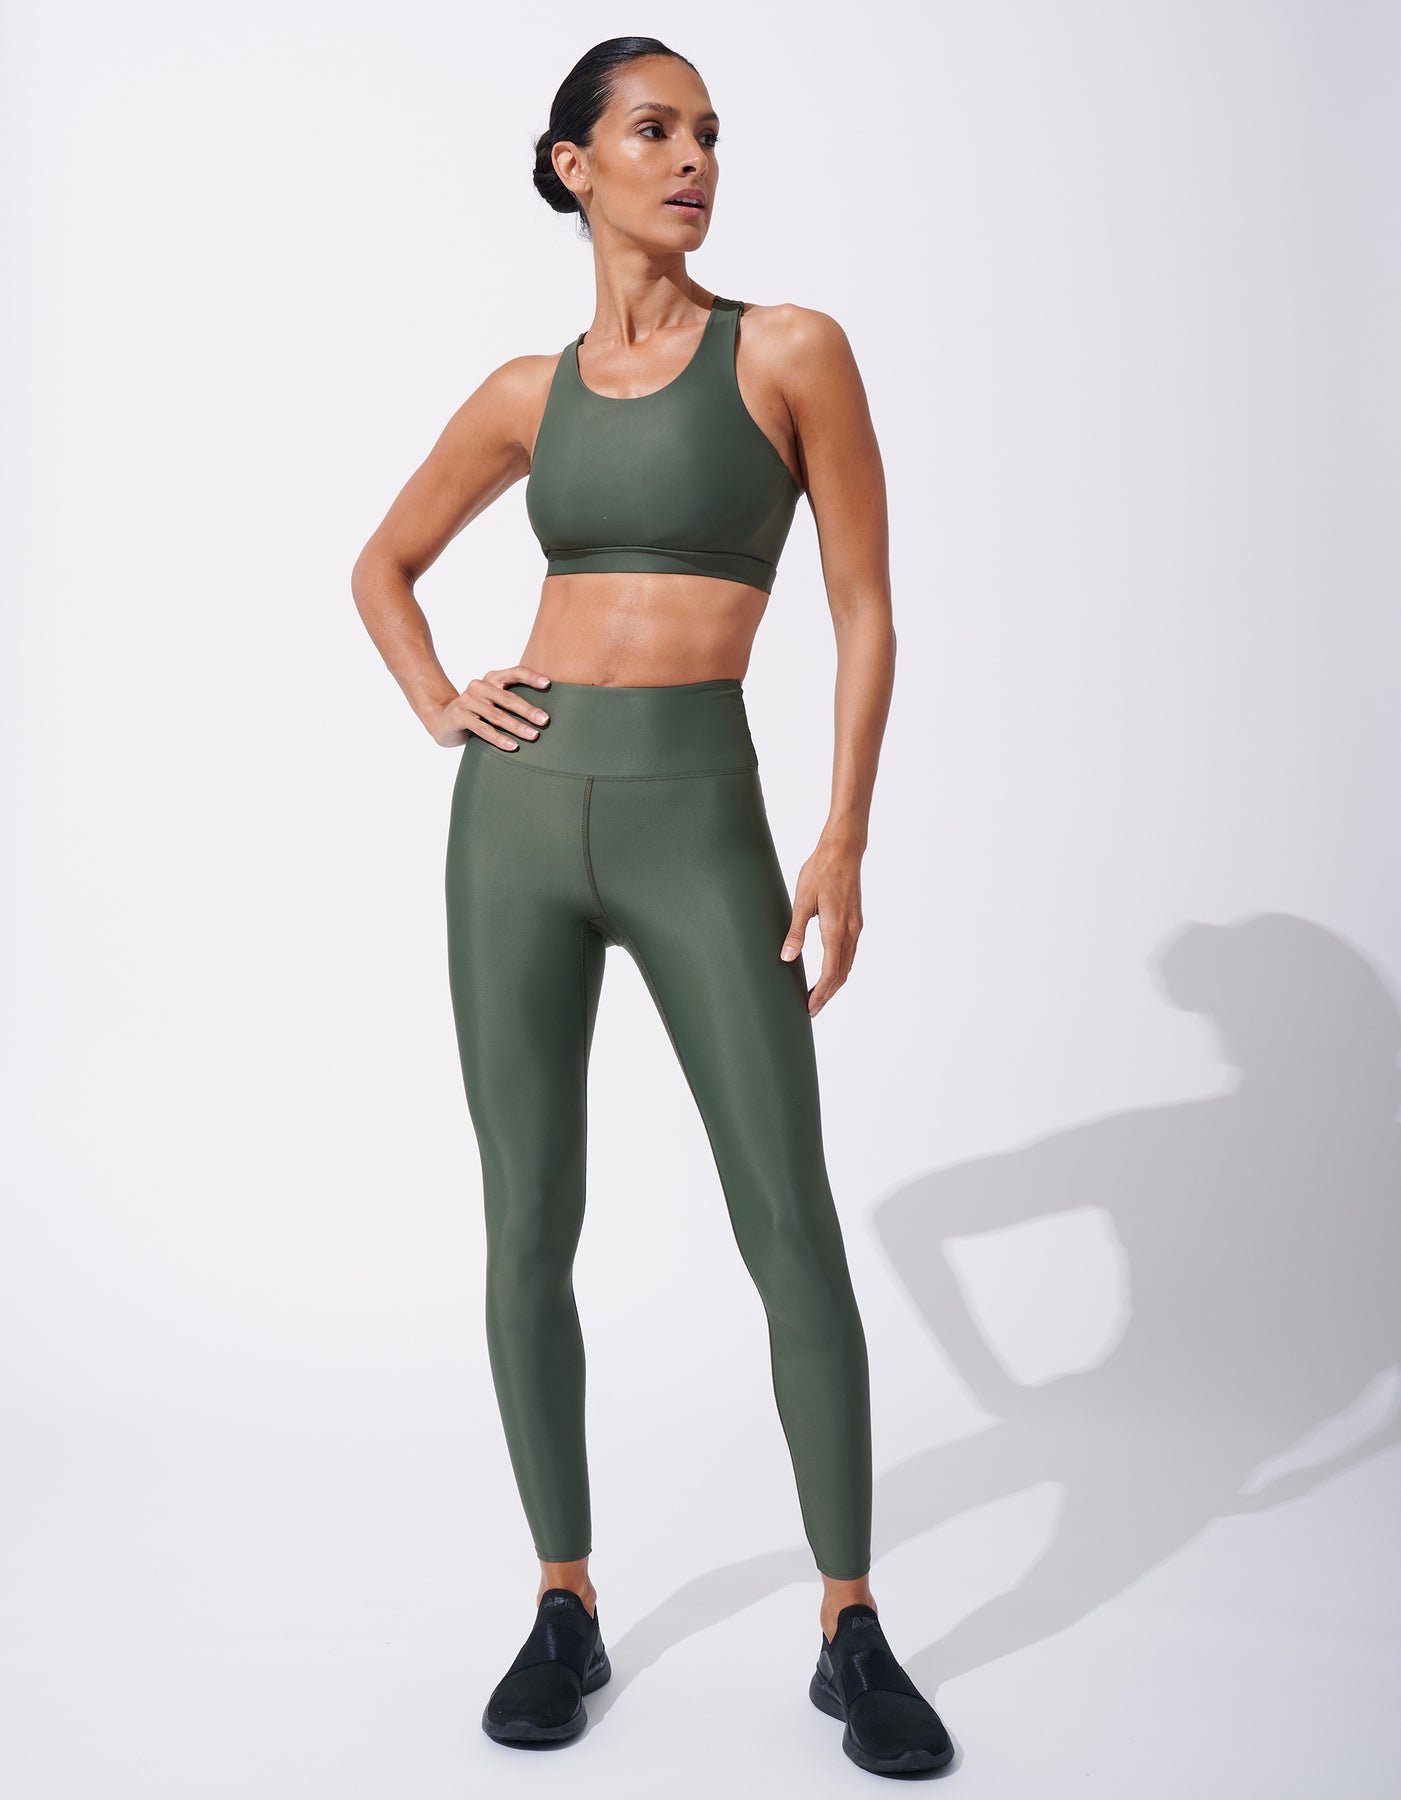 Glyder Spring Review: Ninja Crops + Yogini Tank + Action Bra (P.S. 15%  Off!) - Agent Athletica